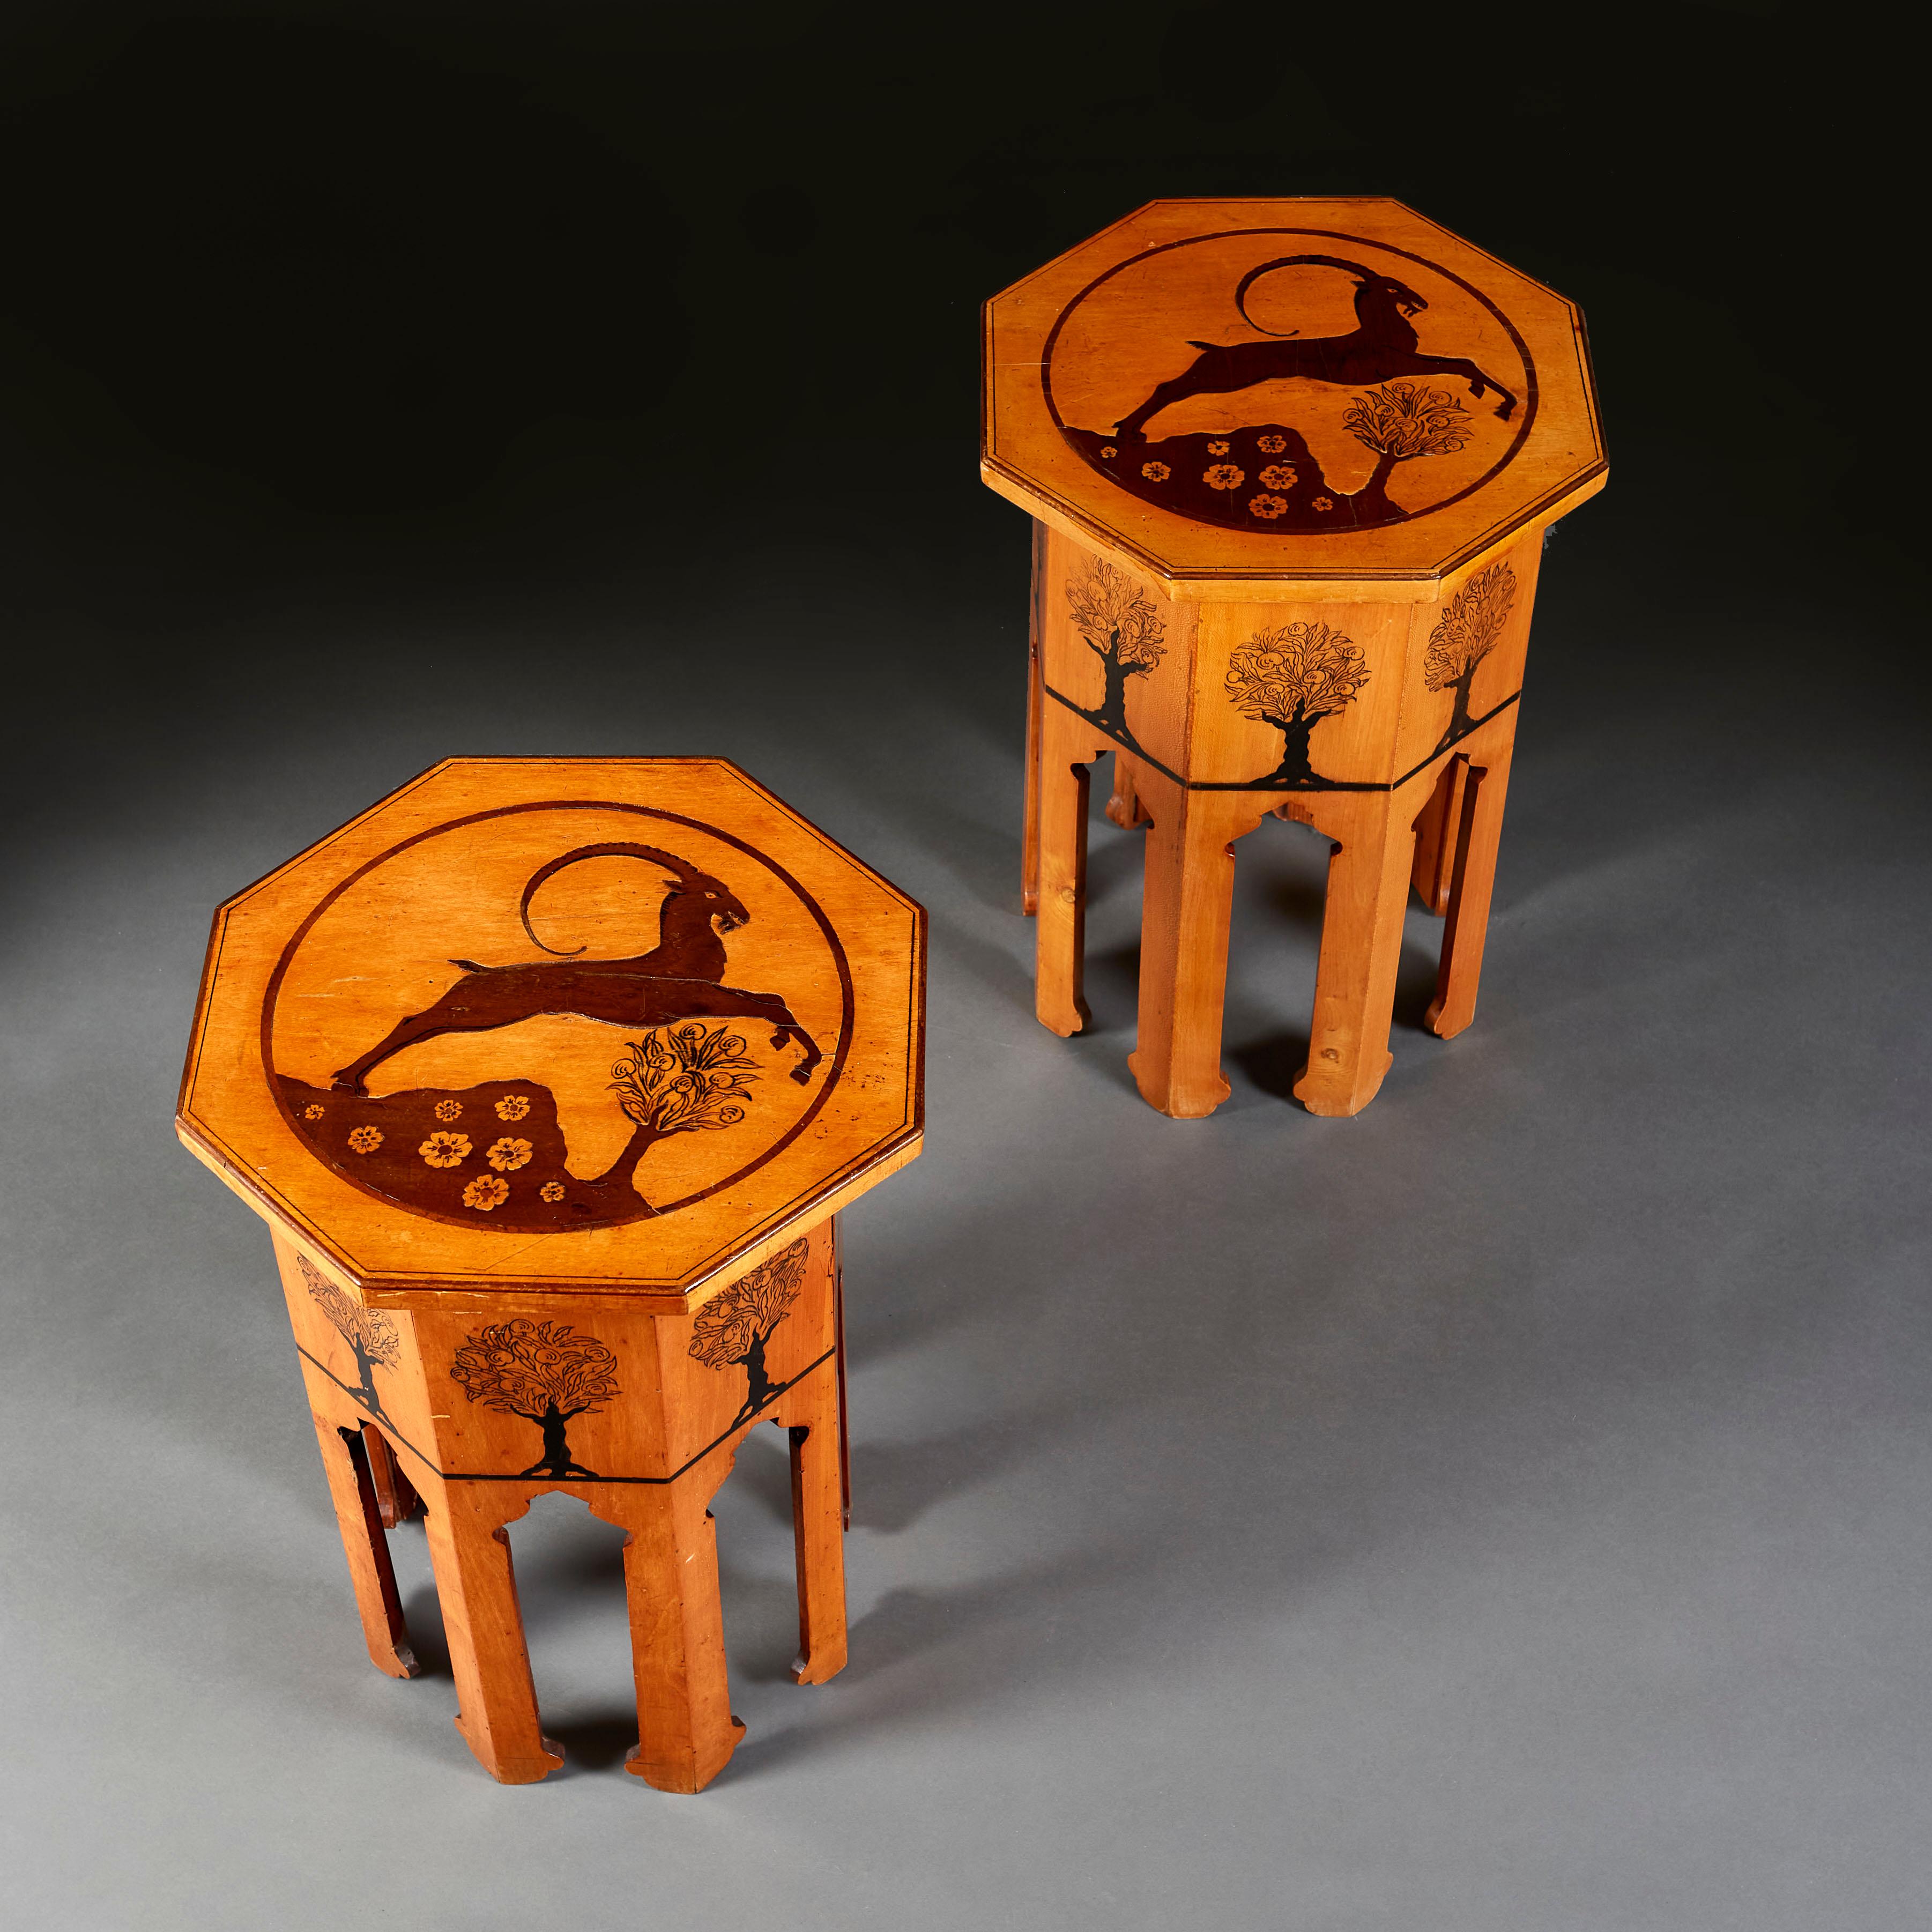 A pair of early twentieth century Moorish occasional tables of octagonal form, the tops with leaping antelope and stylised trees, the bases with arched panels.